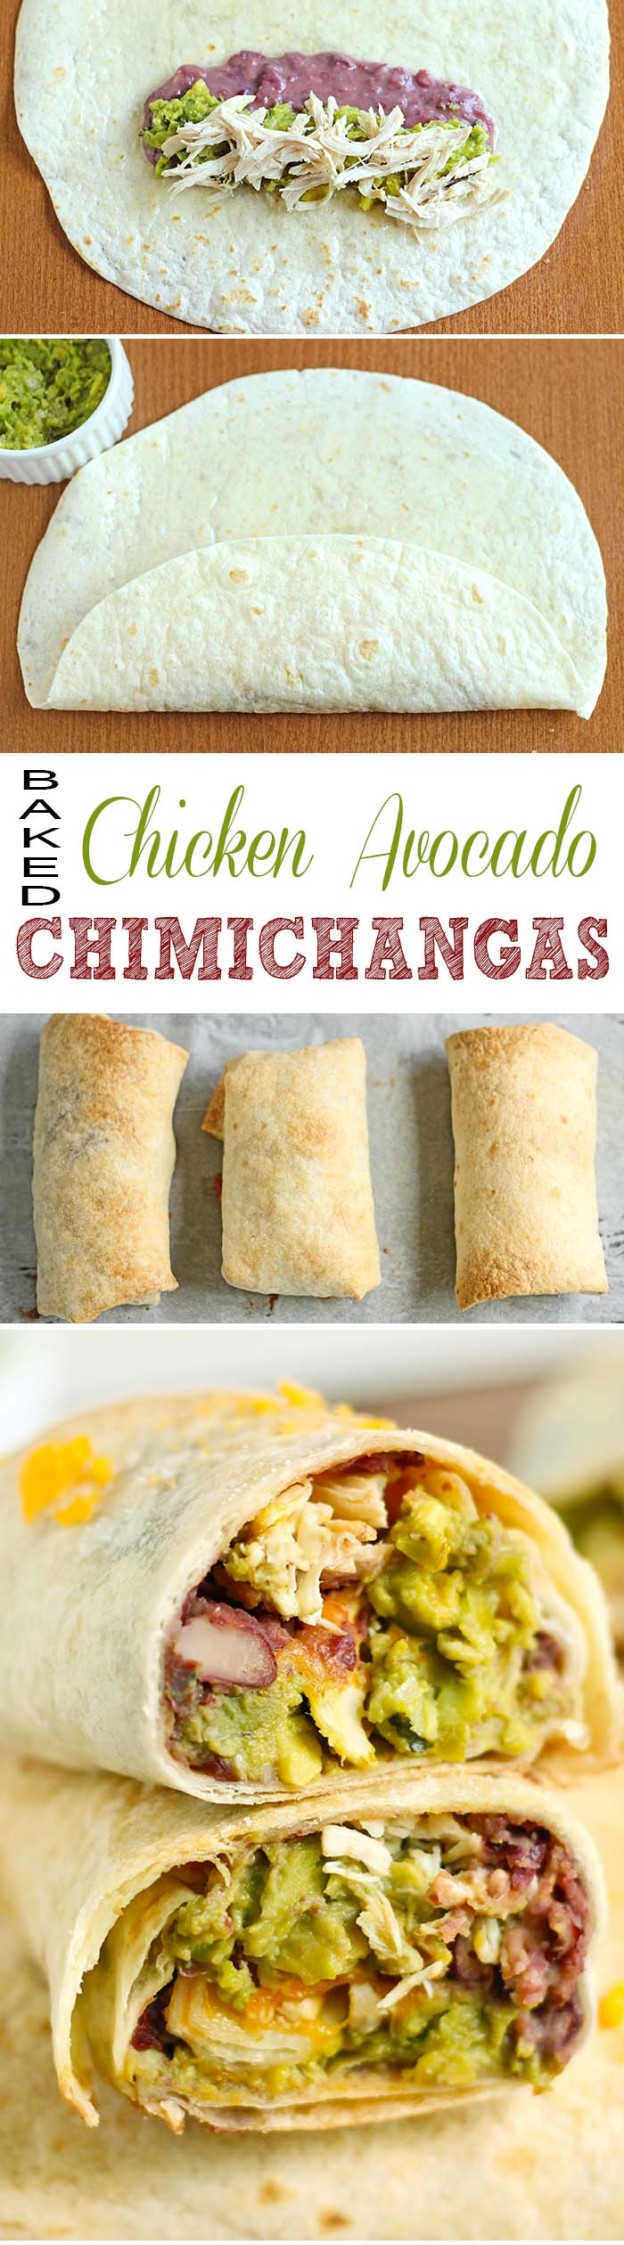 Baked Chicken Avocado Chimichangas - Cakescottage